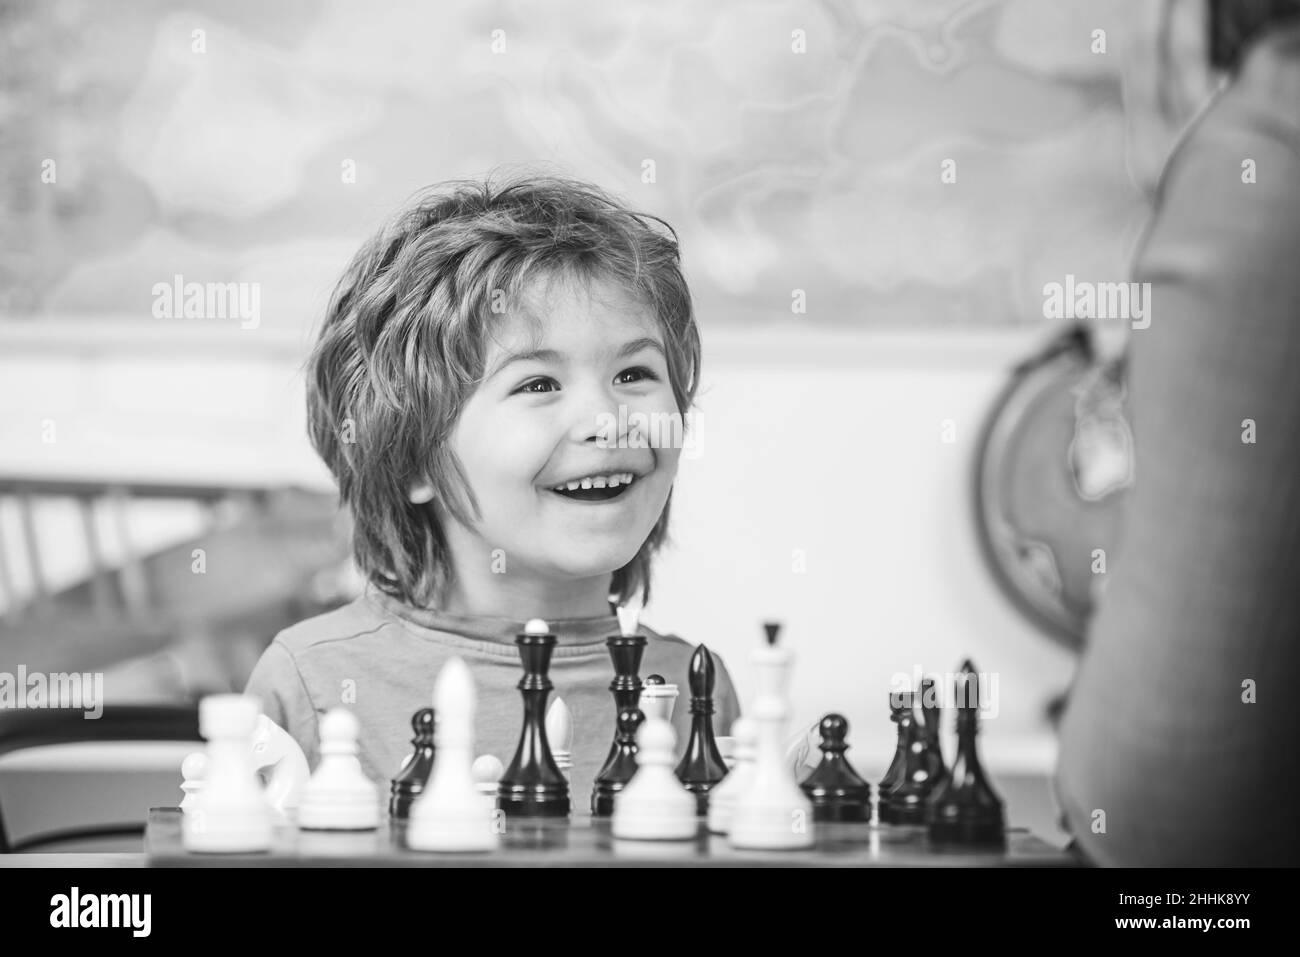 Young kid boy playing chess and having fun. Cheerful smiling little boy sitting at the table and evincing gladness while playing chess. Stock Photo